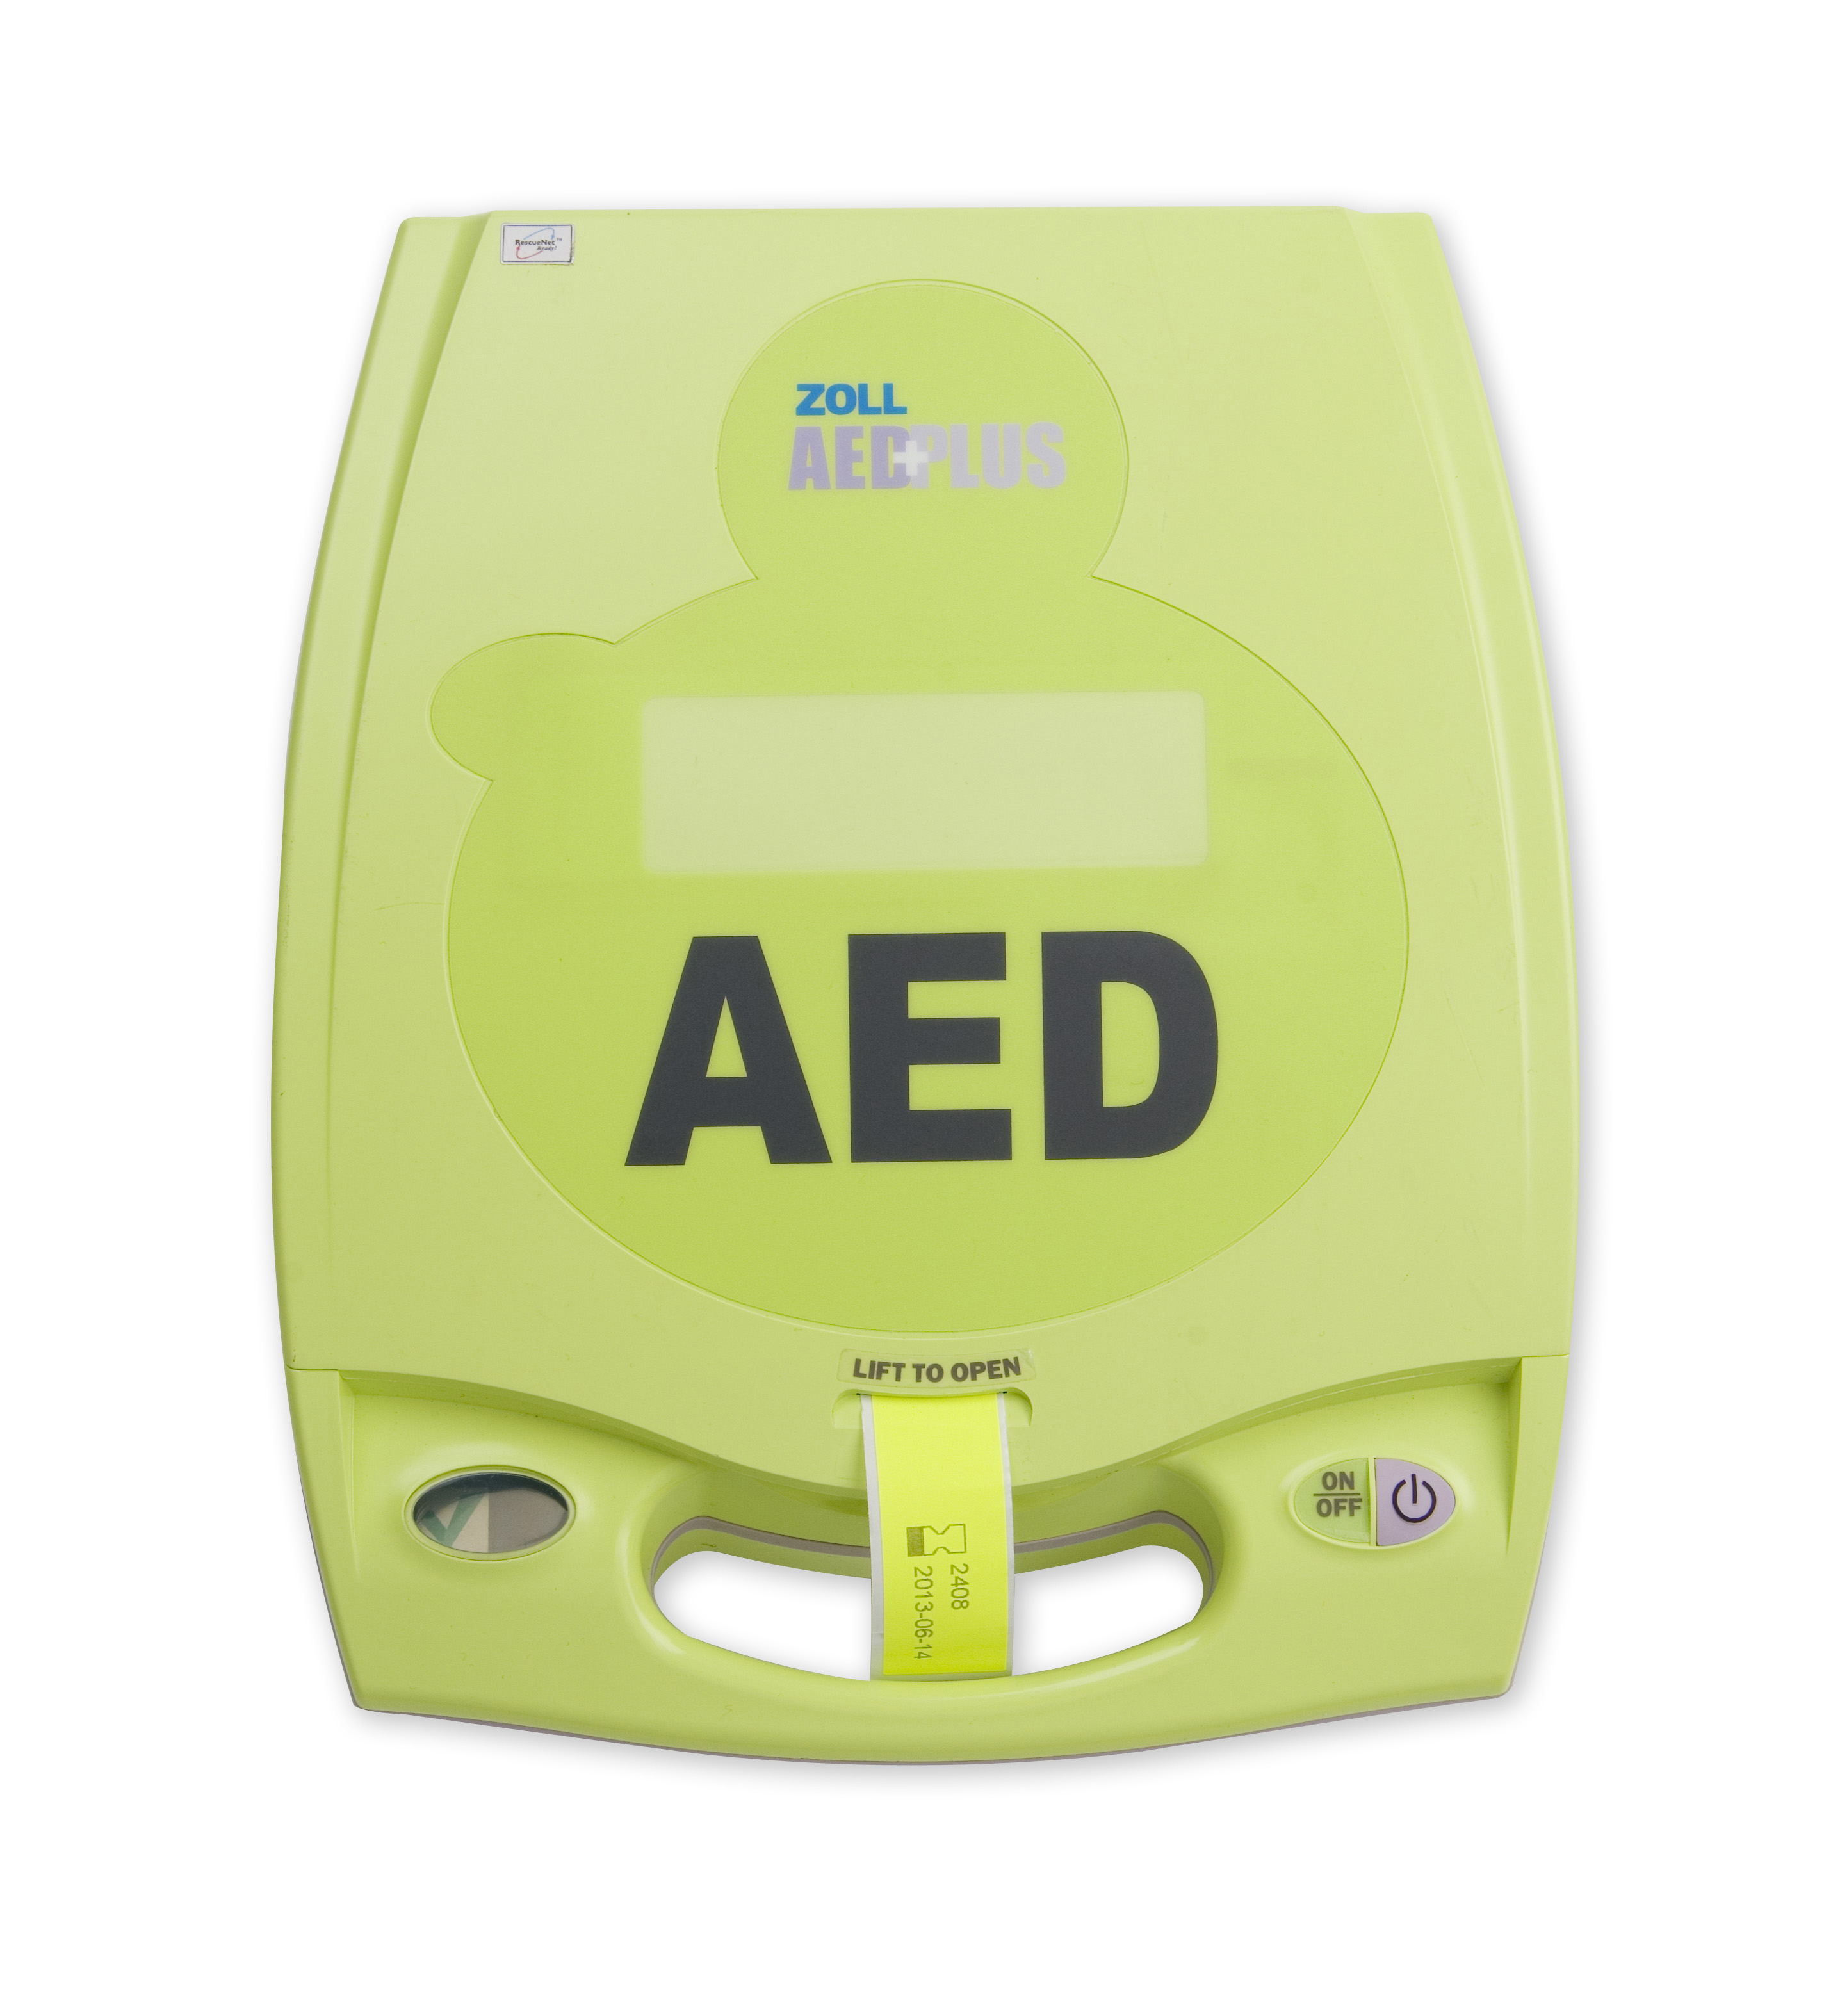 Zoll AED Plus Nation's Best CPR